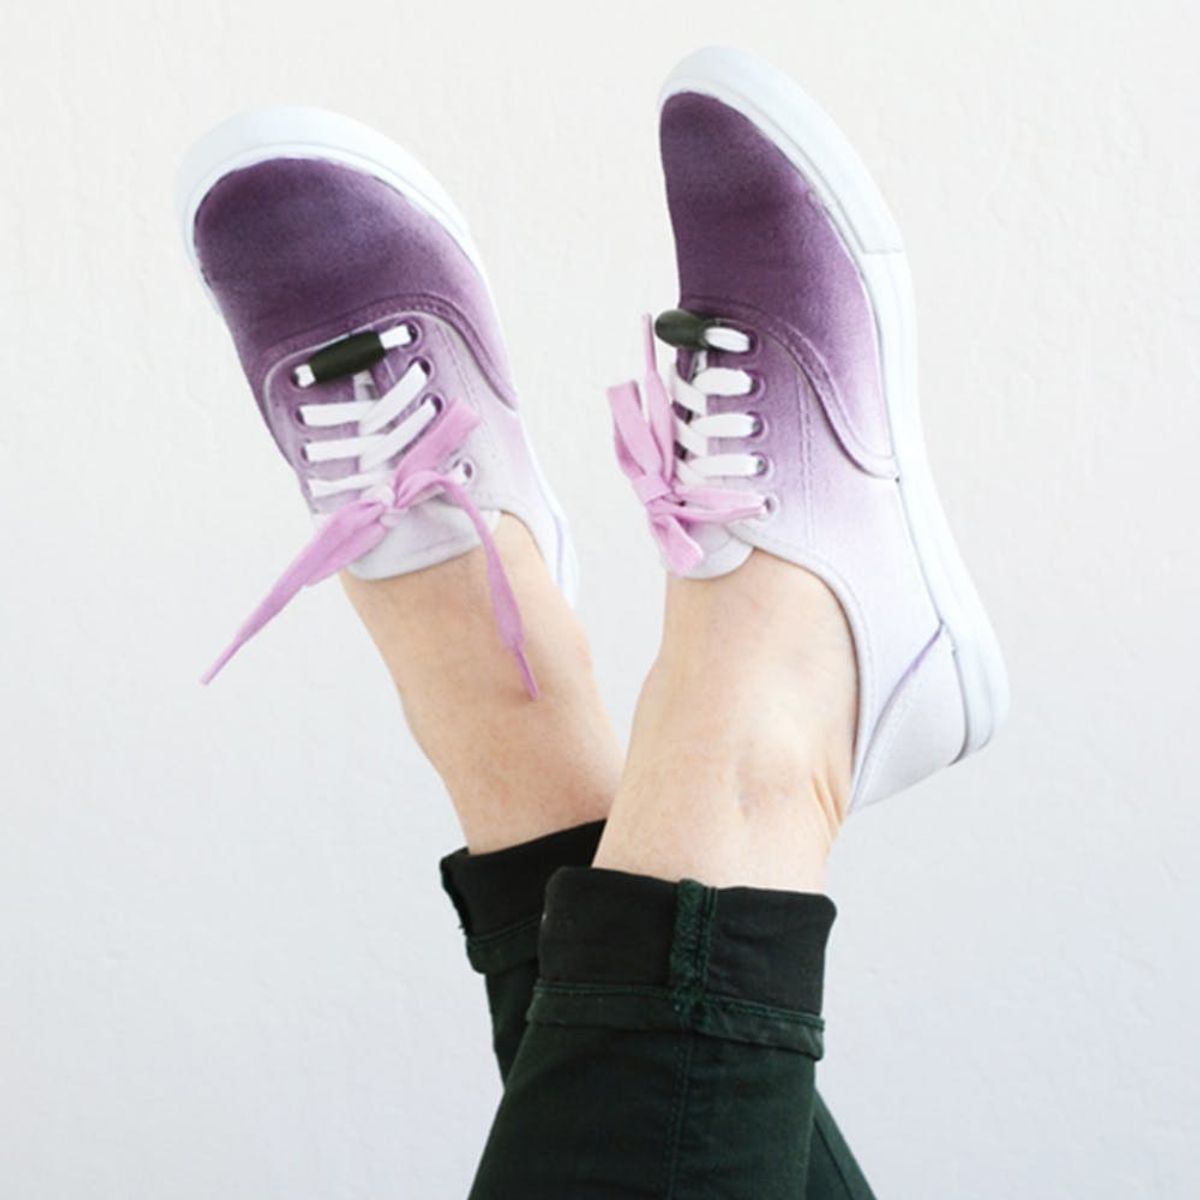 What to Make This Weekend: A Vertical Desk Organizer, Ombré Sneakers + More